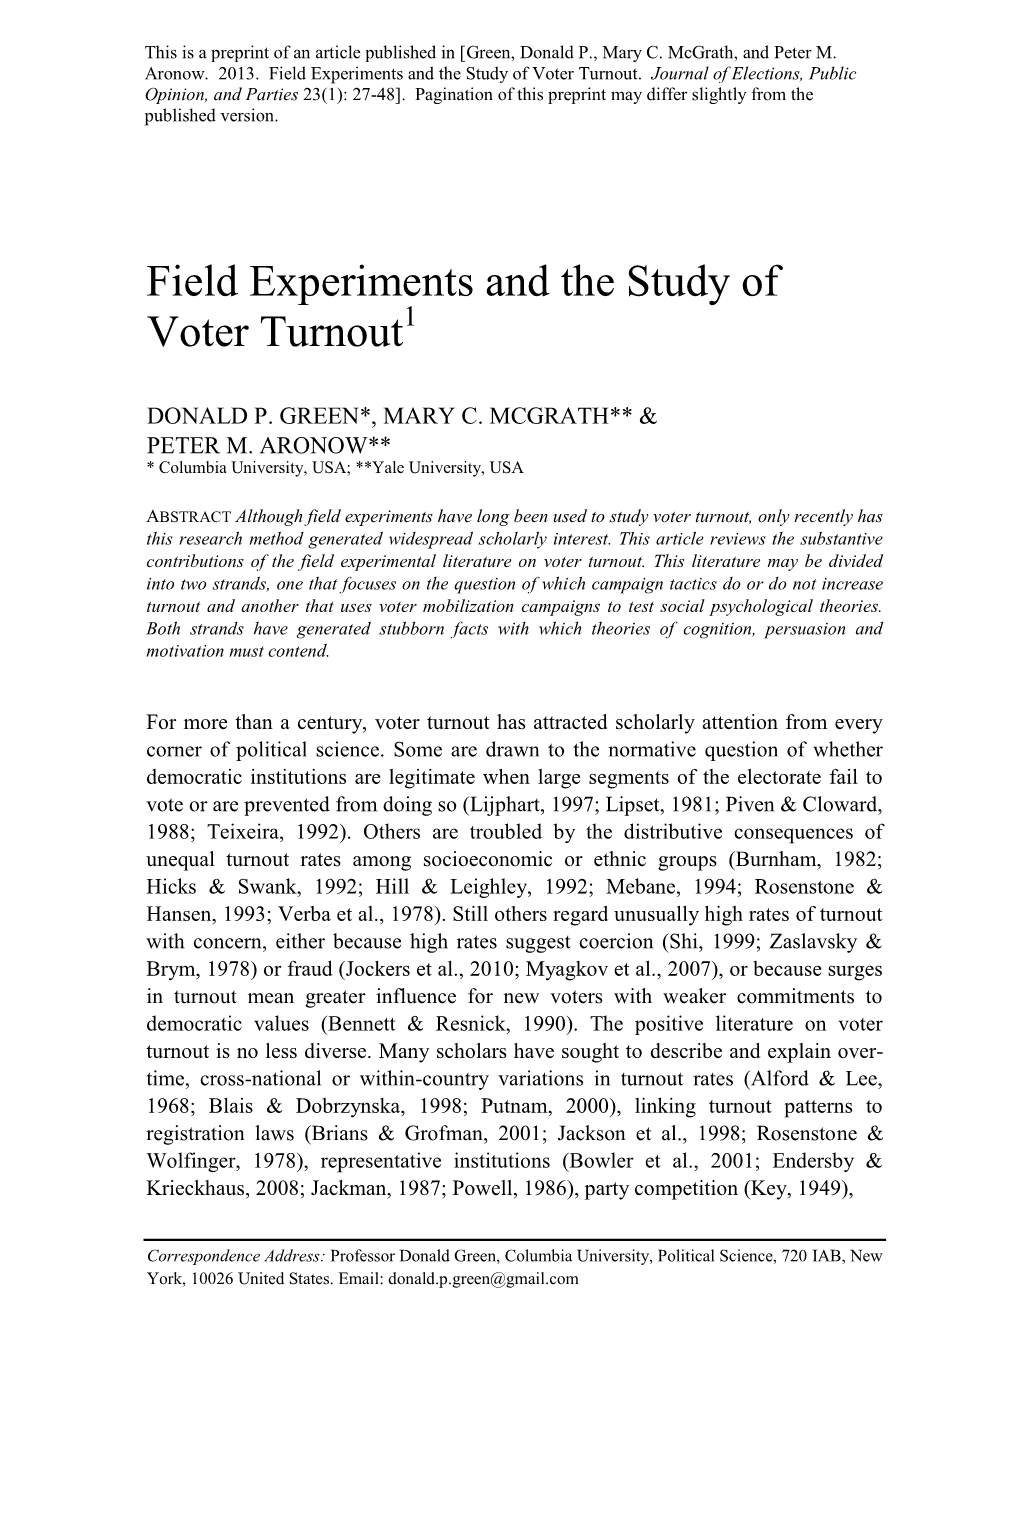 Field Experiments and the Study of Voter Turnout